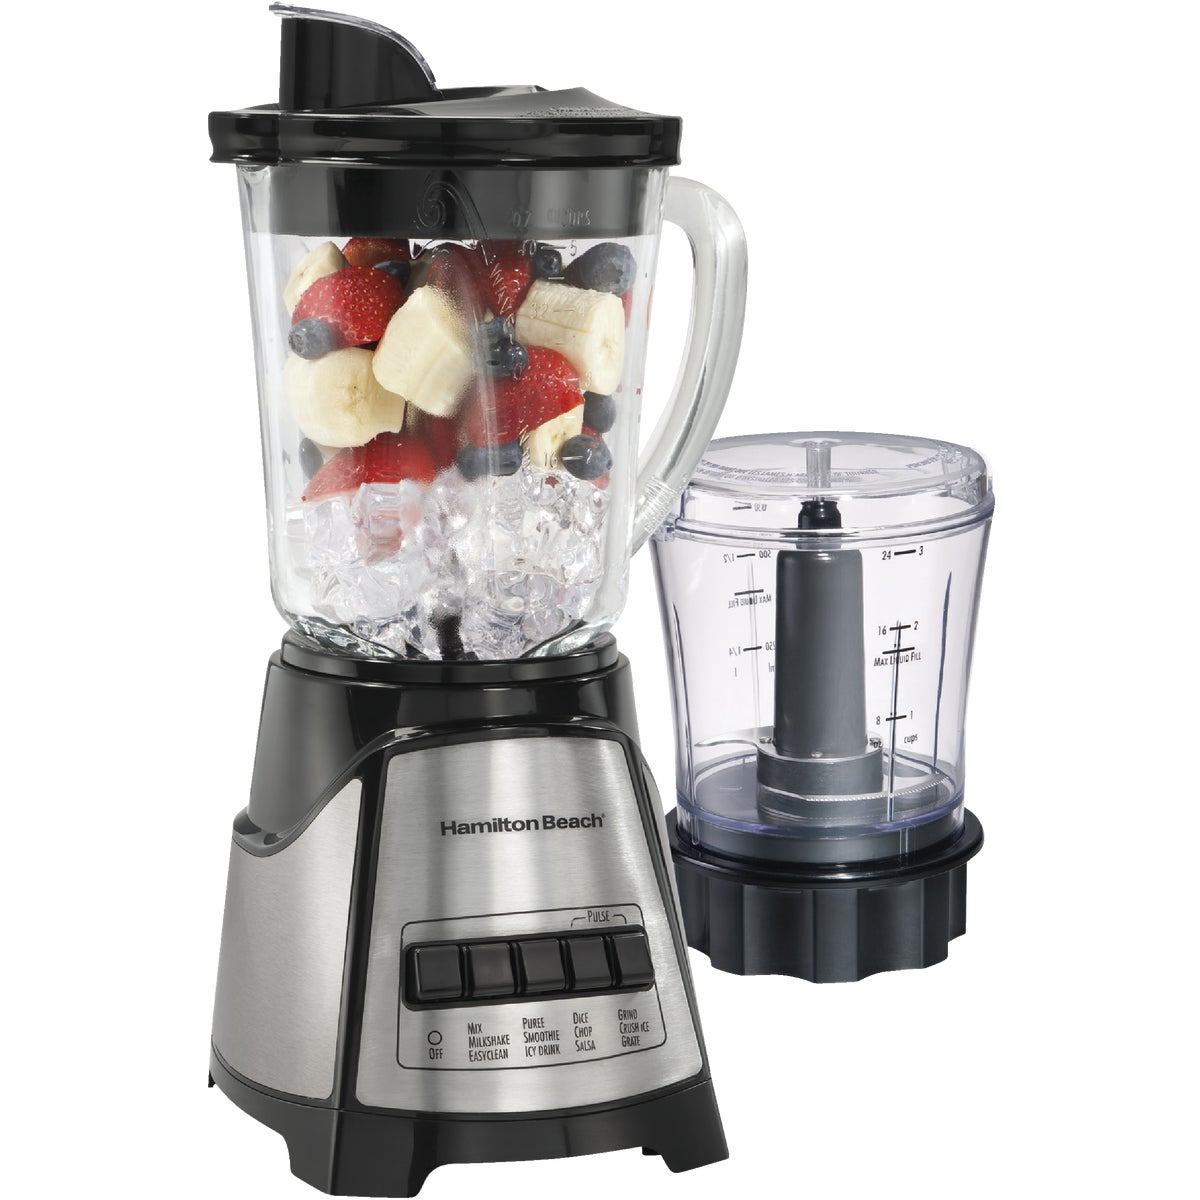 Item 650231, 2 appliances in 1. Blender with 5-cup glass jar.